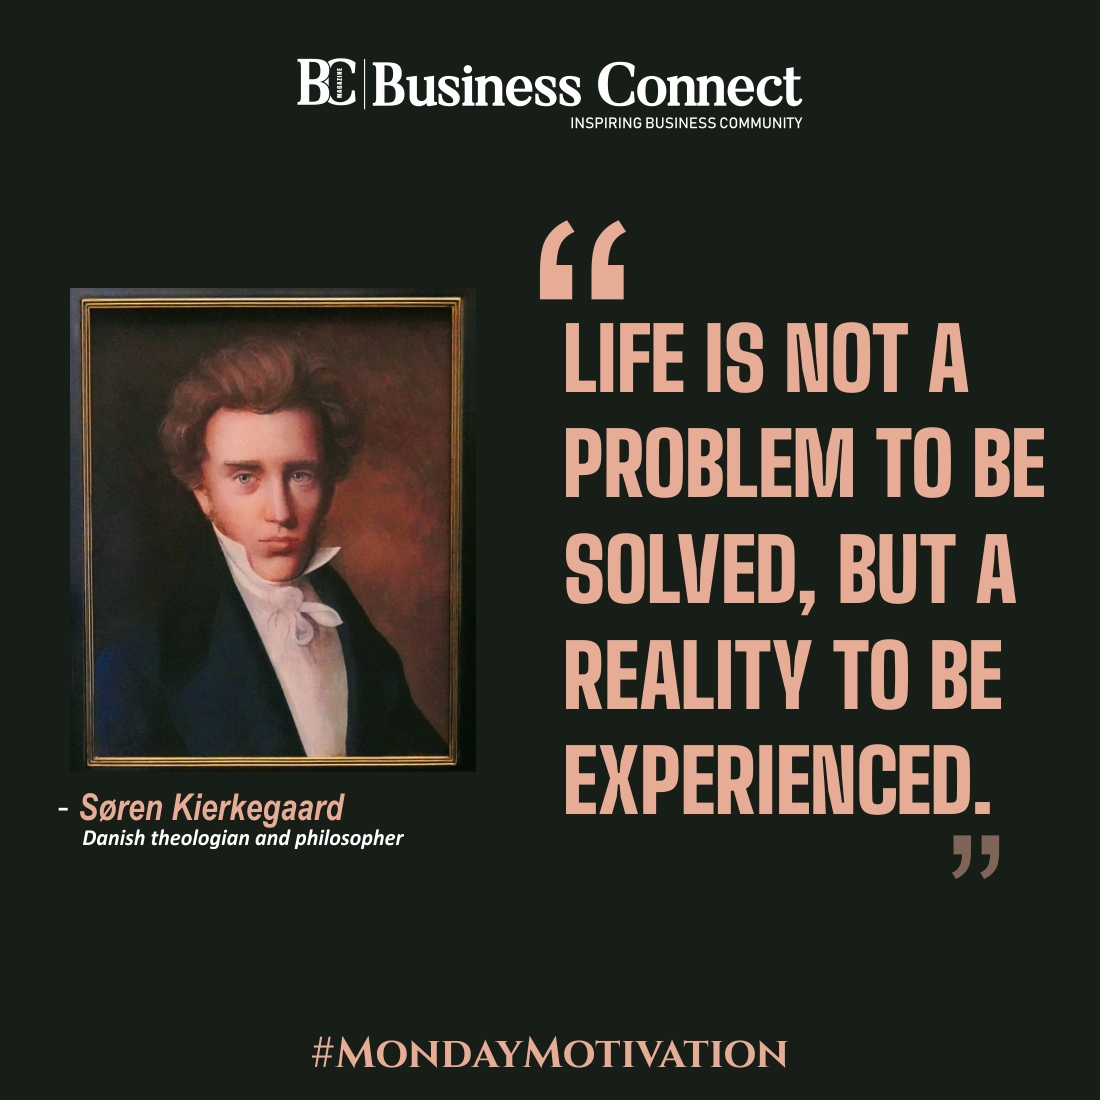 “Life is not a problem to be solved, but a reality to be experienced.”- Søren Kierkegaard

#SørenKierkegaard #motivation #todayquote #quotes #monday #motivationdaily #motivatonvibes #motivationquotedaily #today #inspiration #todaymotivation #motivationoftheday  #quotesdaily